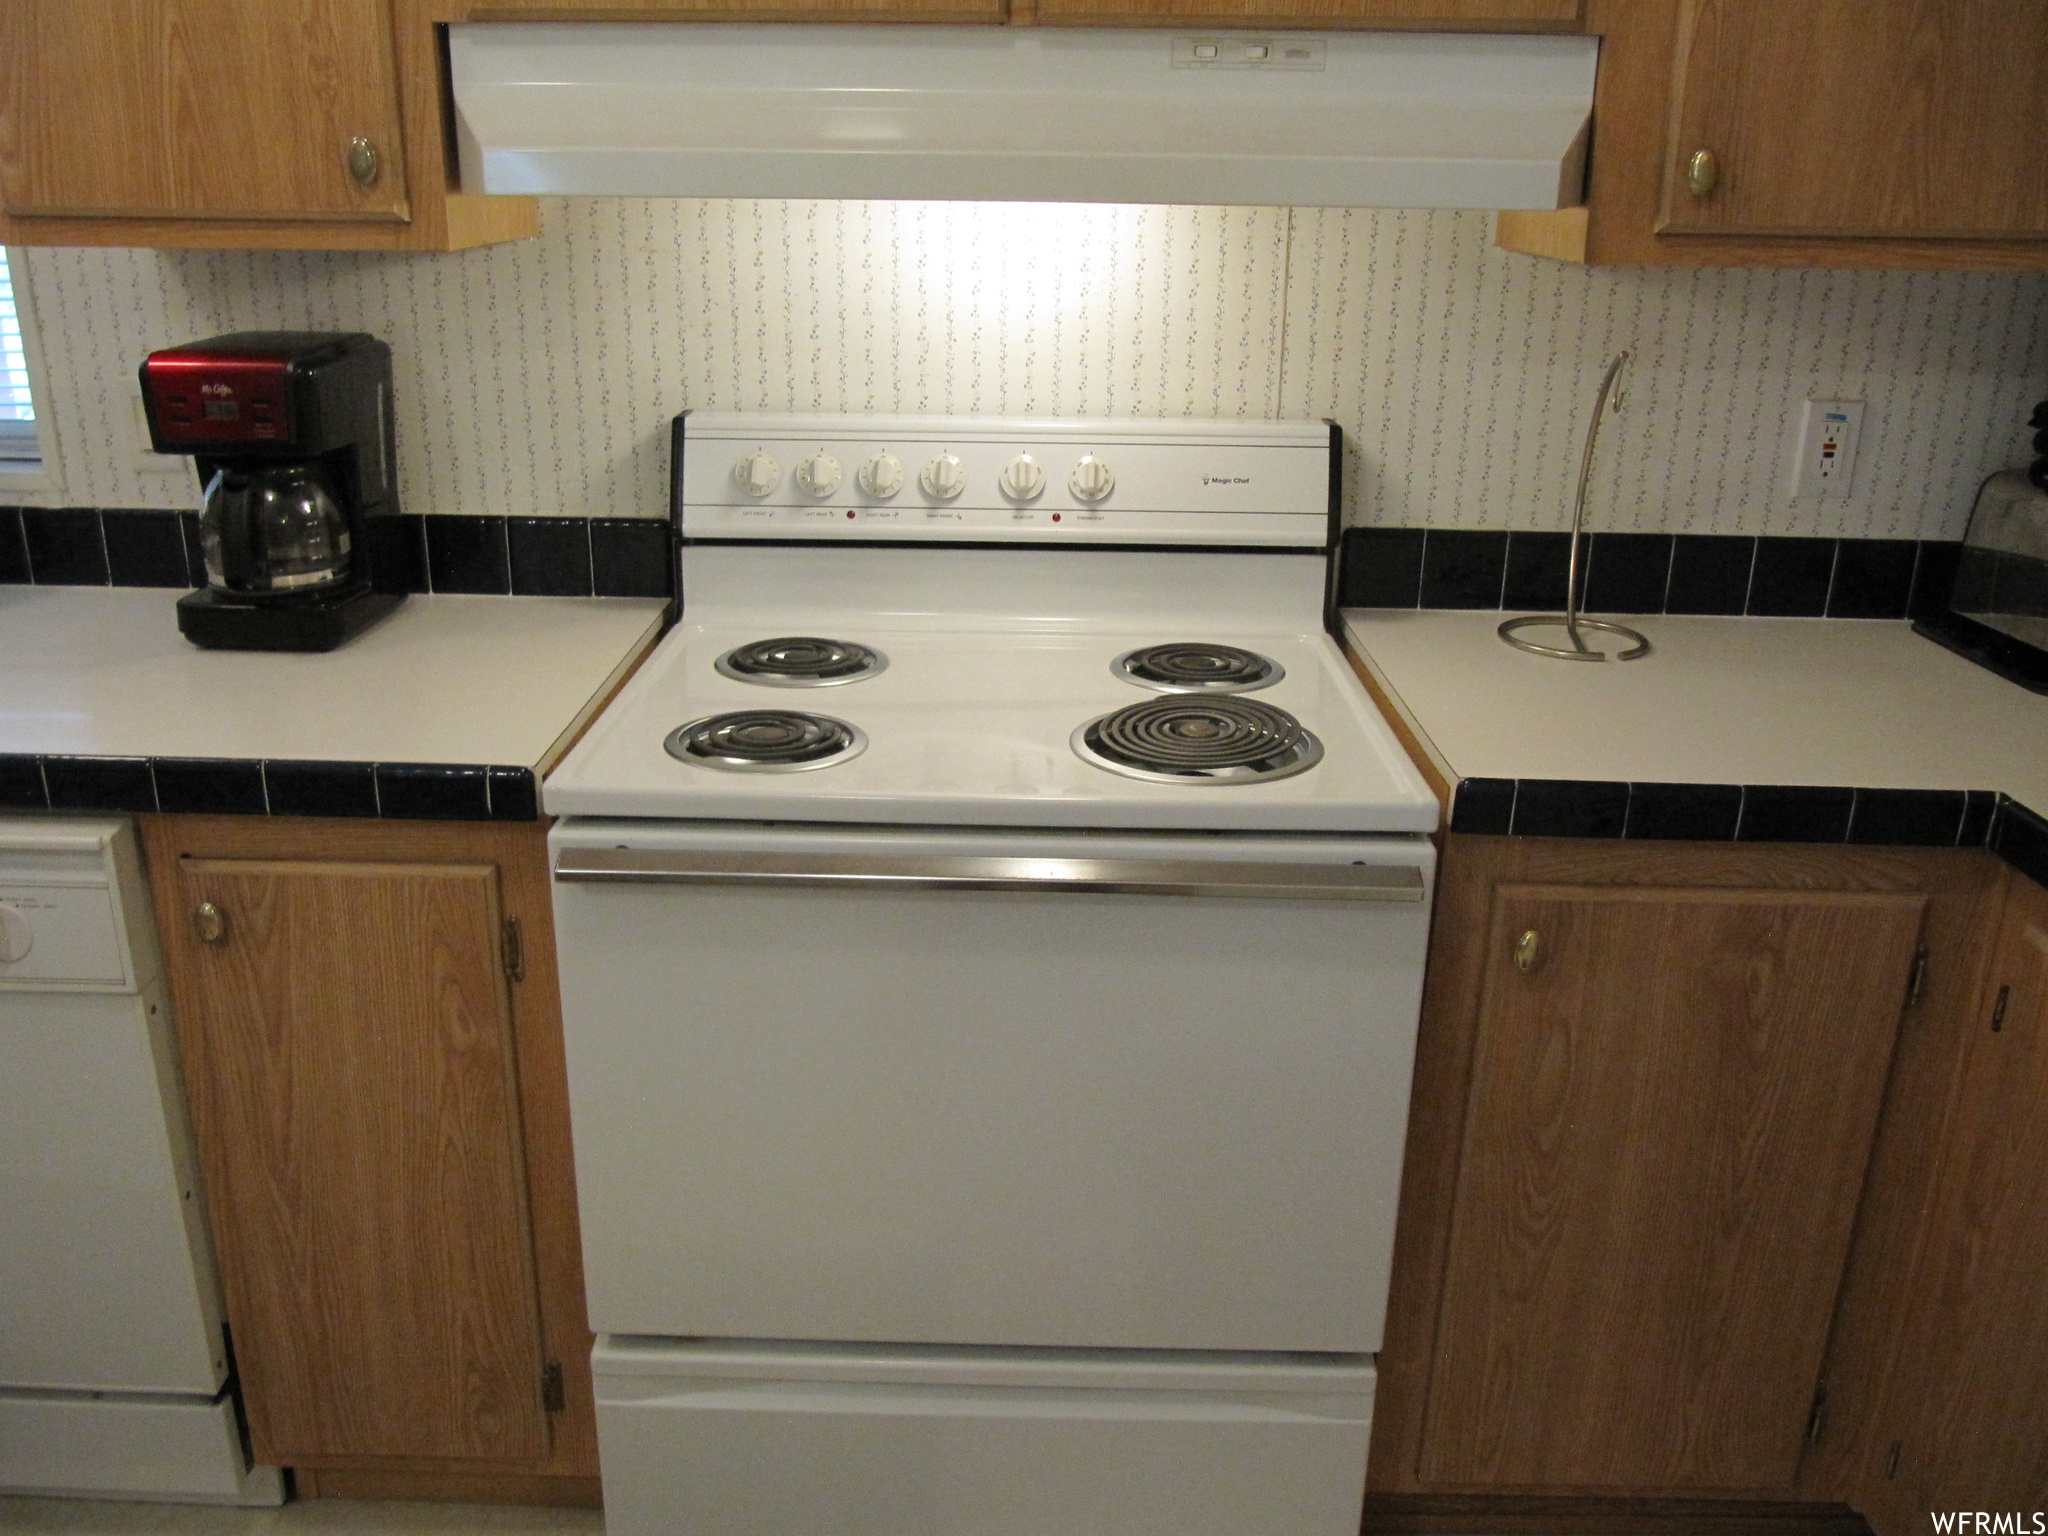 Kitchen featuring electric range oven, dishwasher, exhaust hood, and light countertops